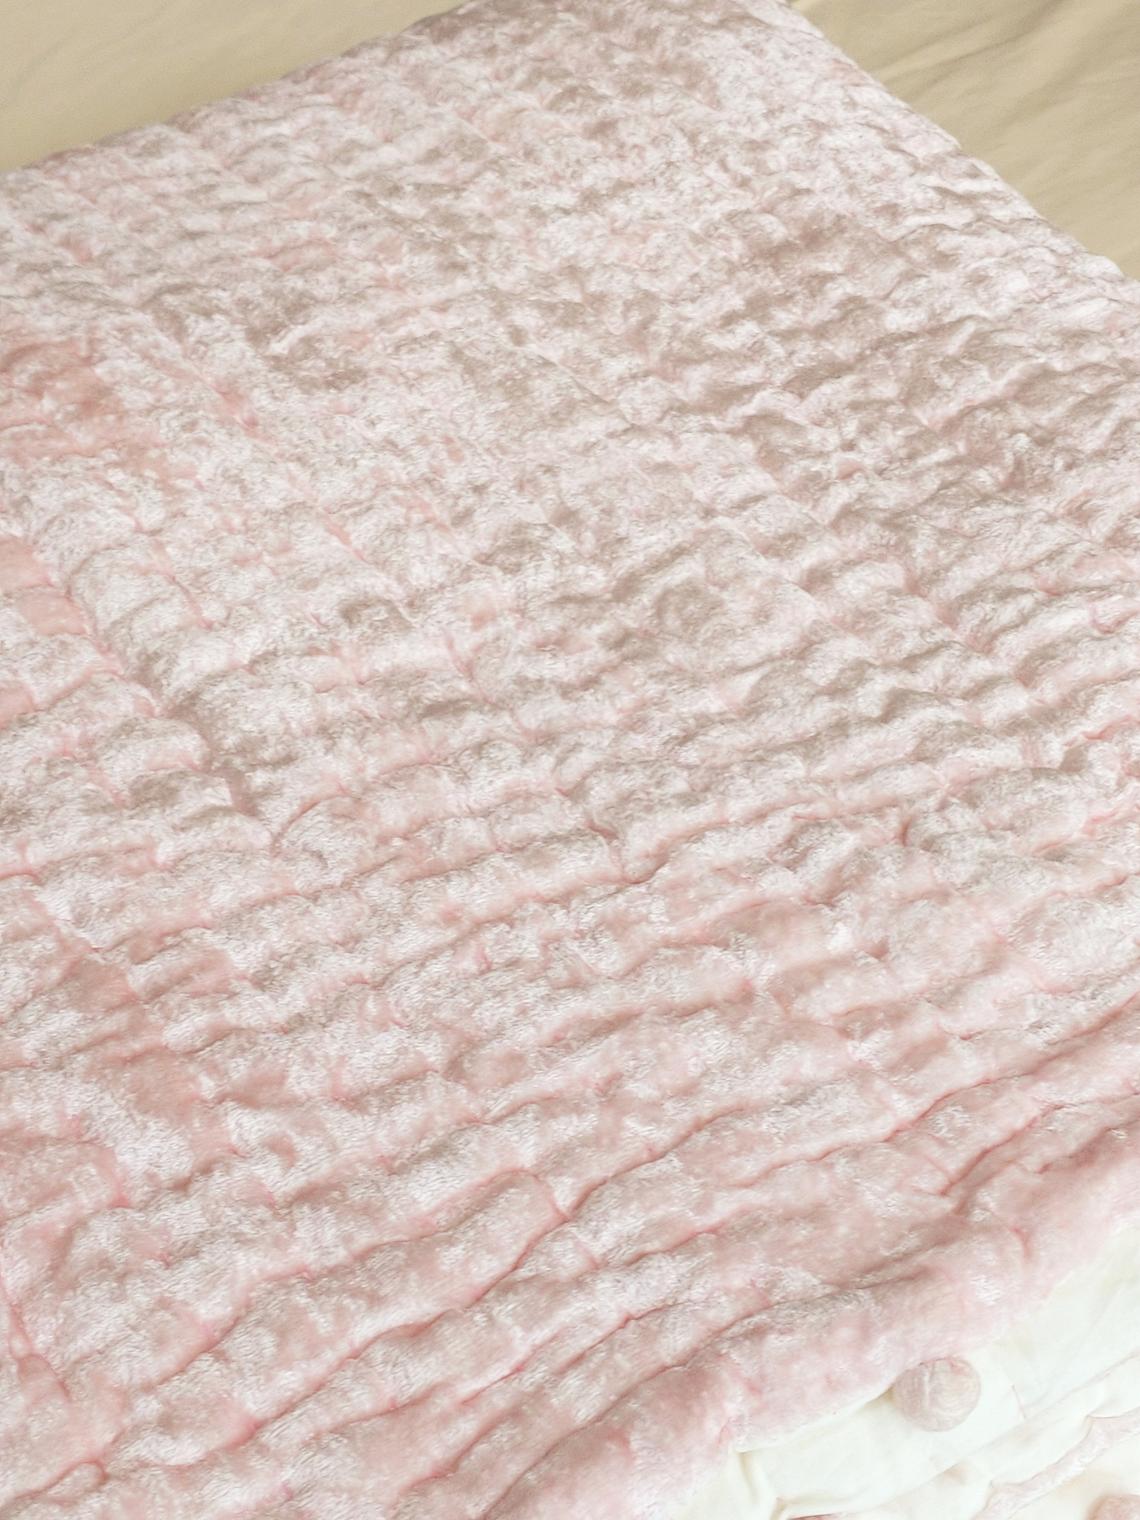 Amore Beaute quilt is pre-washed for a natural and soft look.